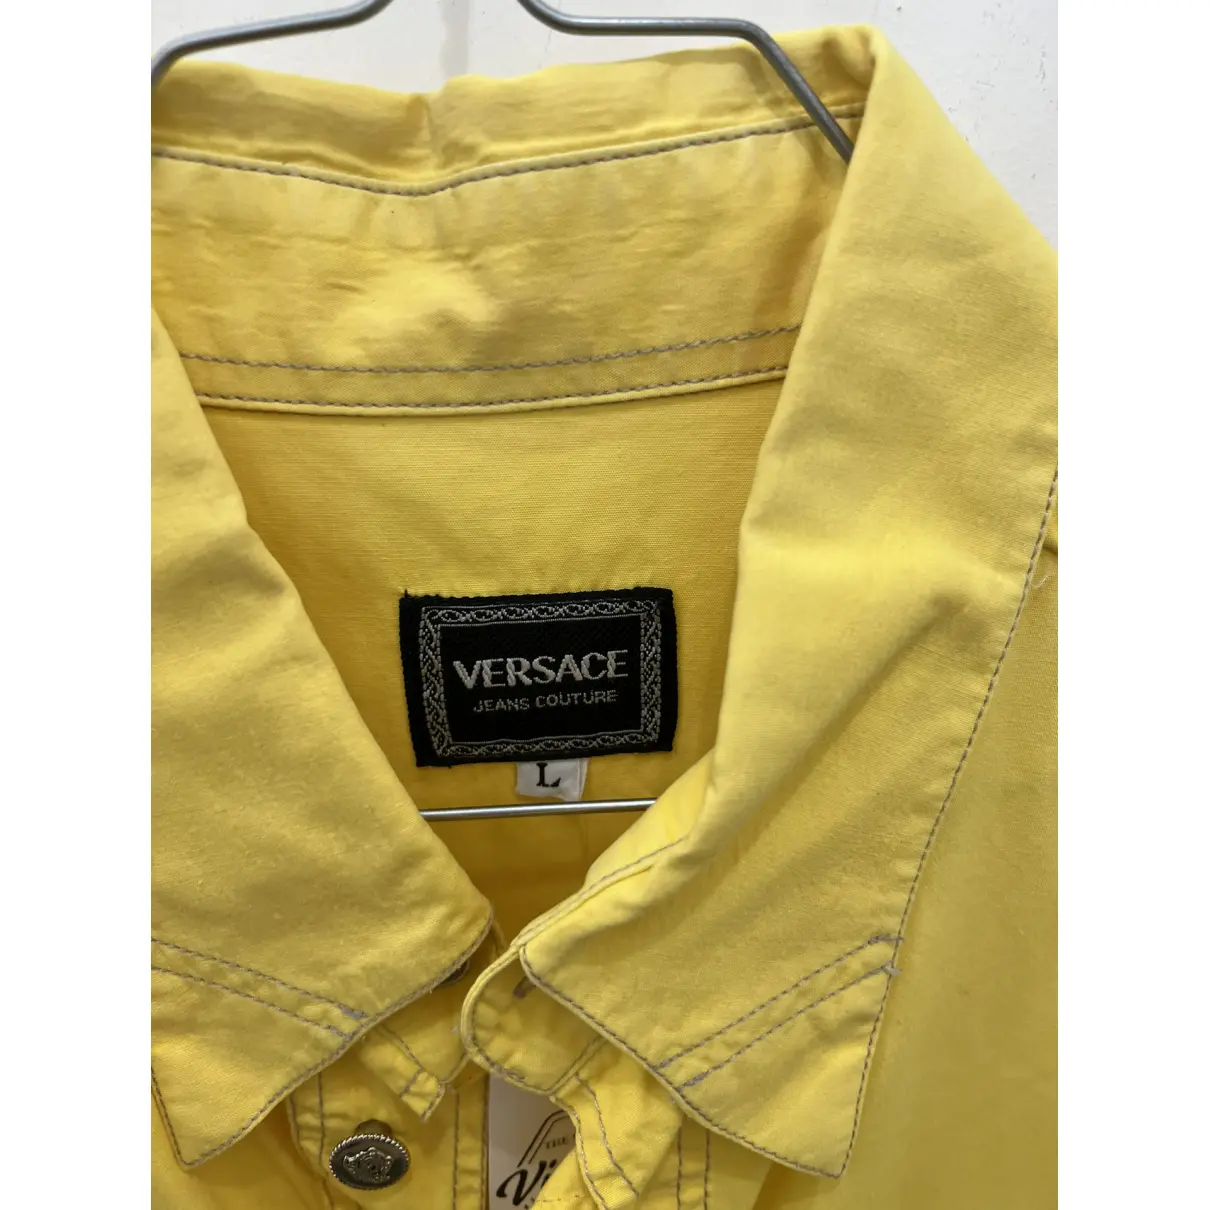 Luxury Versace Jeans Couture Shirts Men